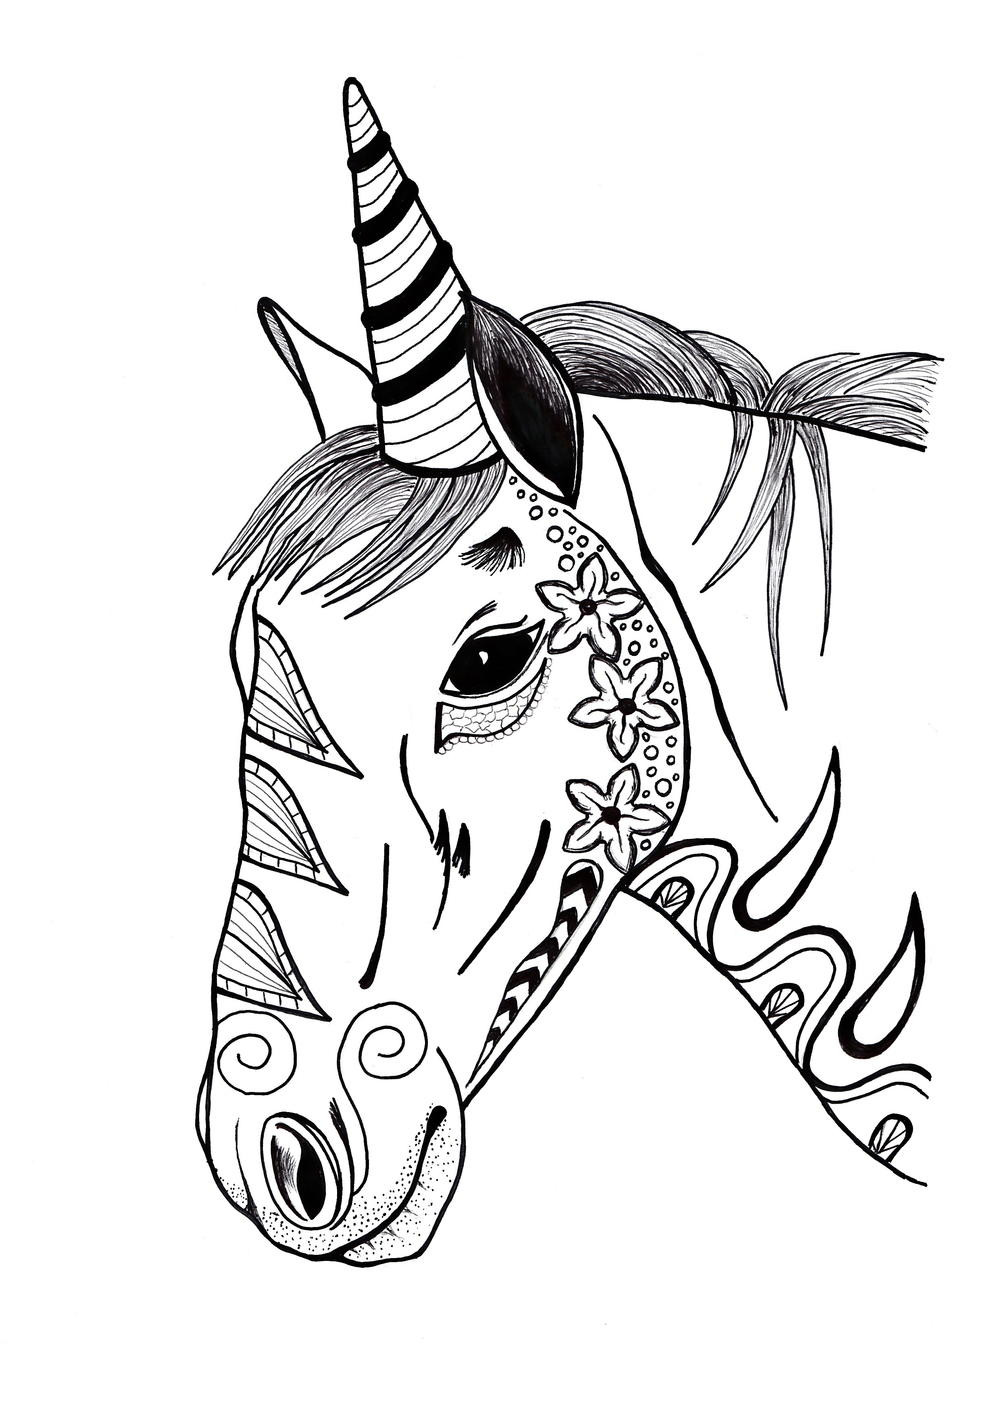 Free Unicorn Coloring Pages For Adults
 Colorful Unicorn Adult Coloring Page